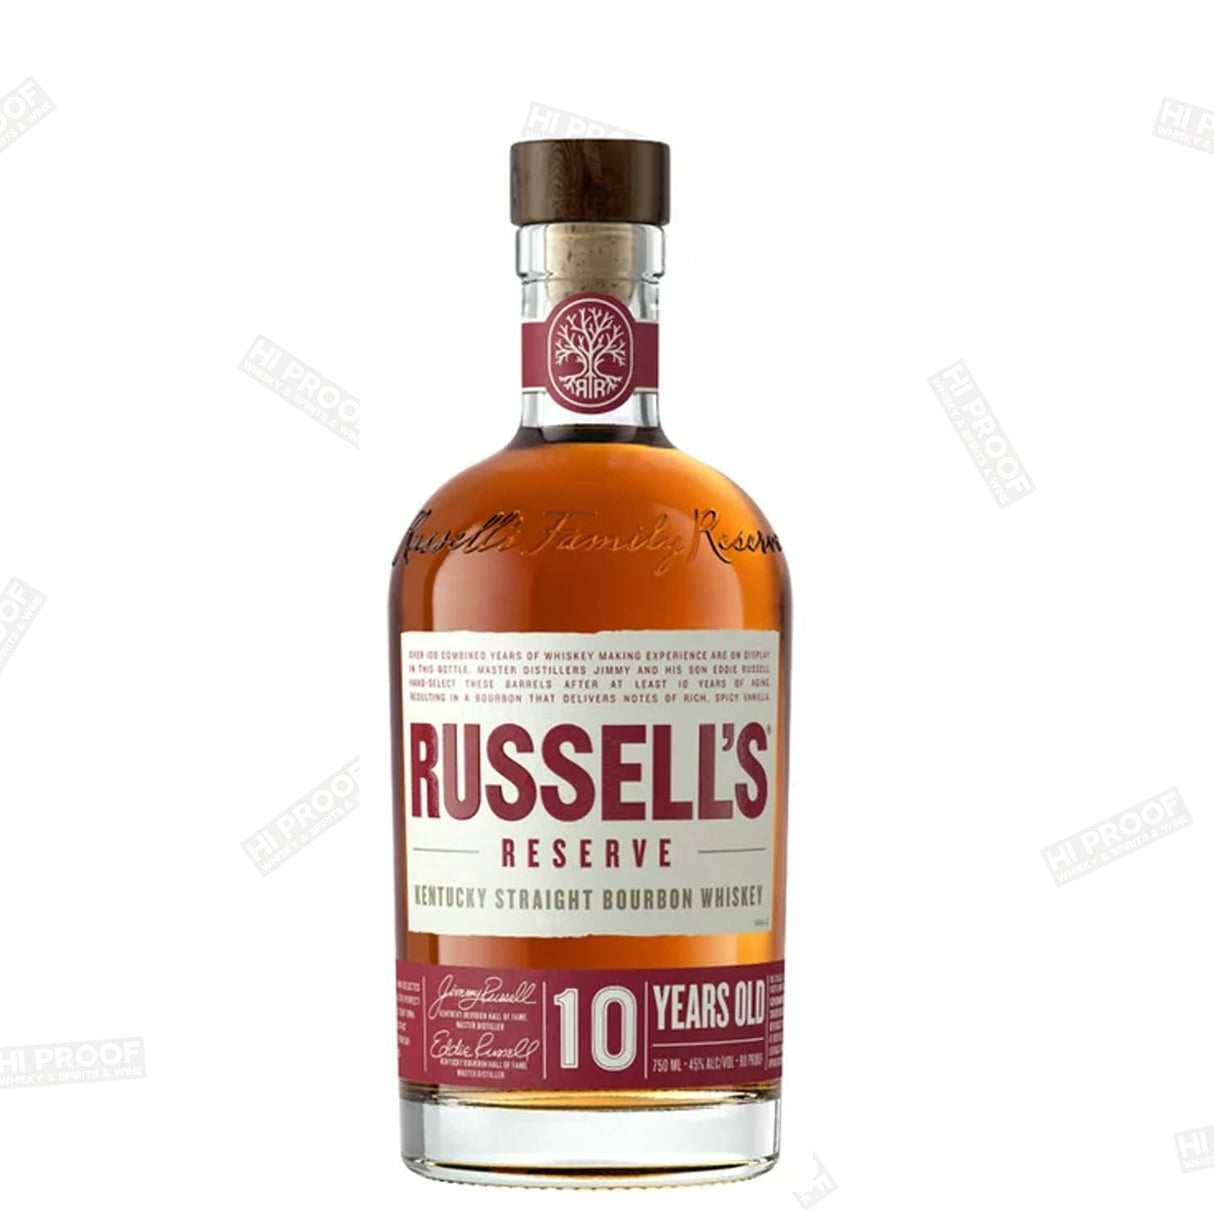 Russell’s Reserve 10 Years Old - Hi Proof - Russell’s